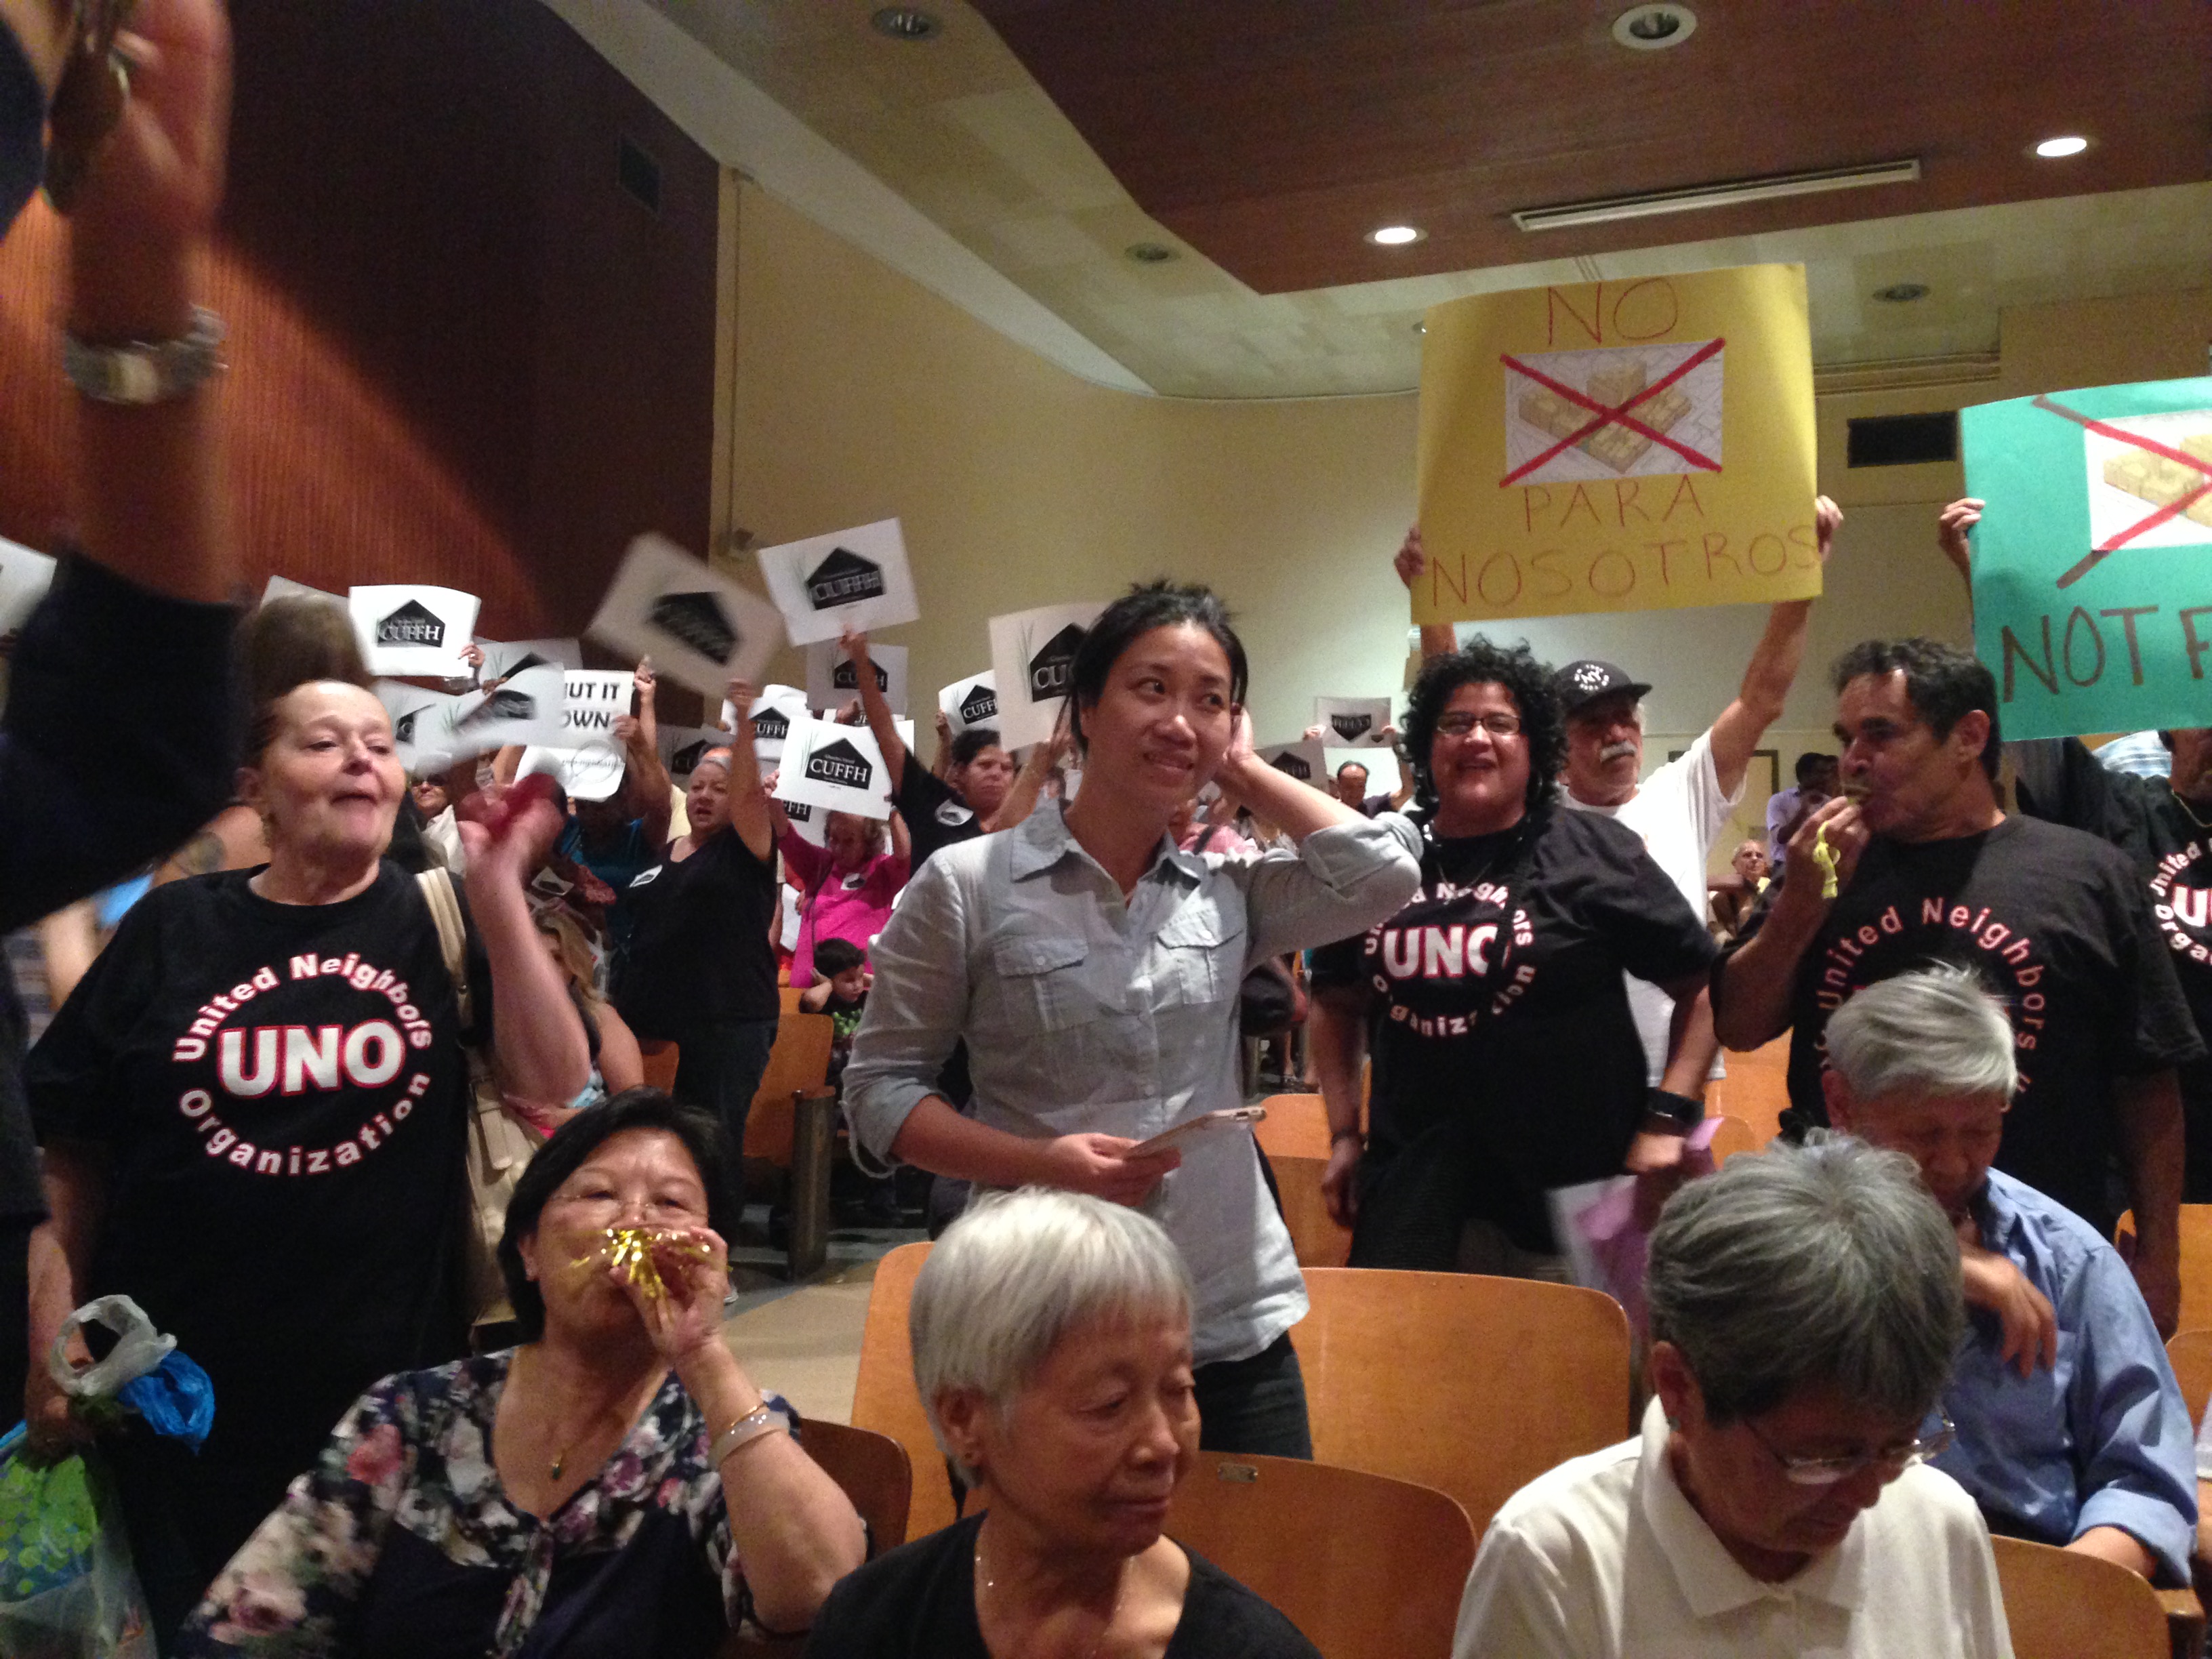 More protesters from last night's meeting.